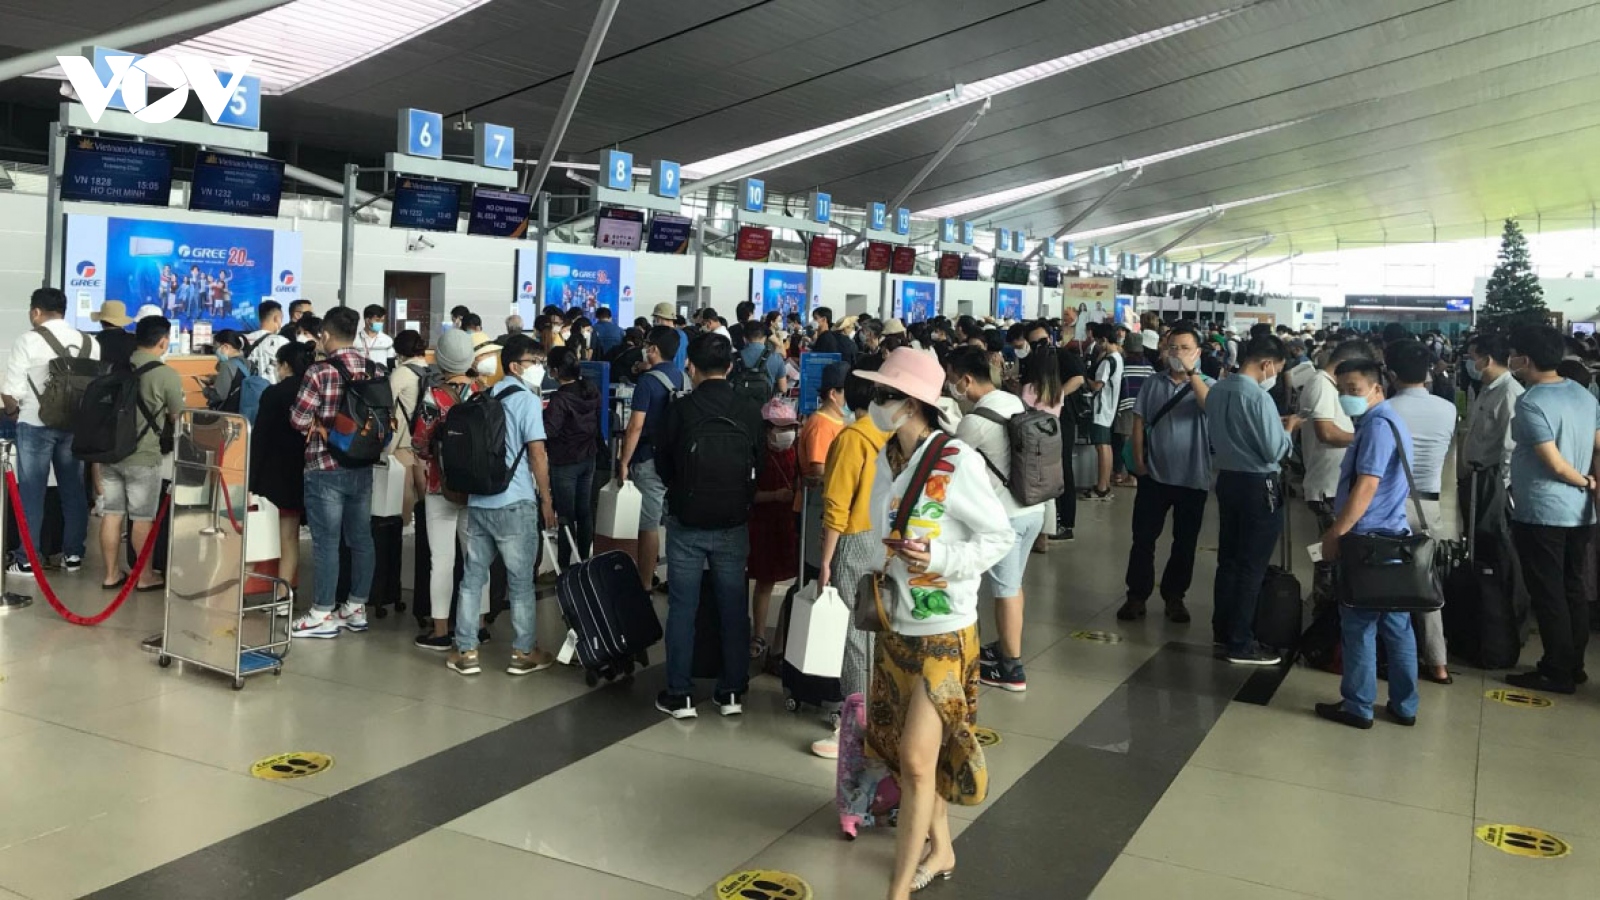 Noi Bai Airport sees record passenger numbers ahead of national holidays